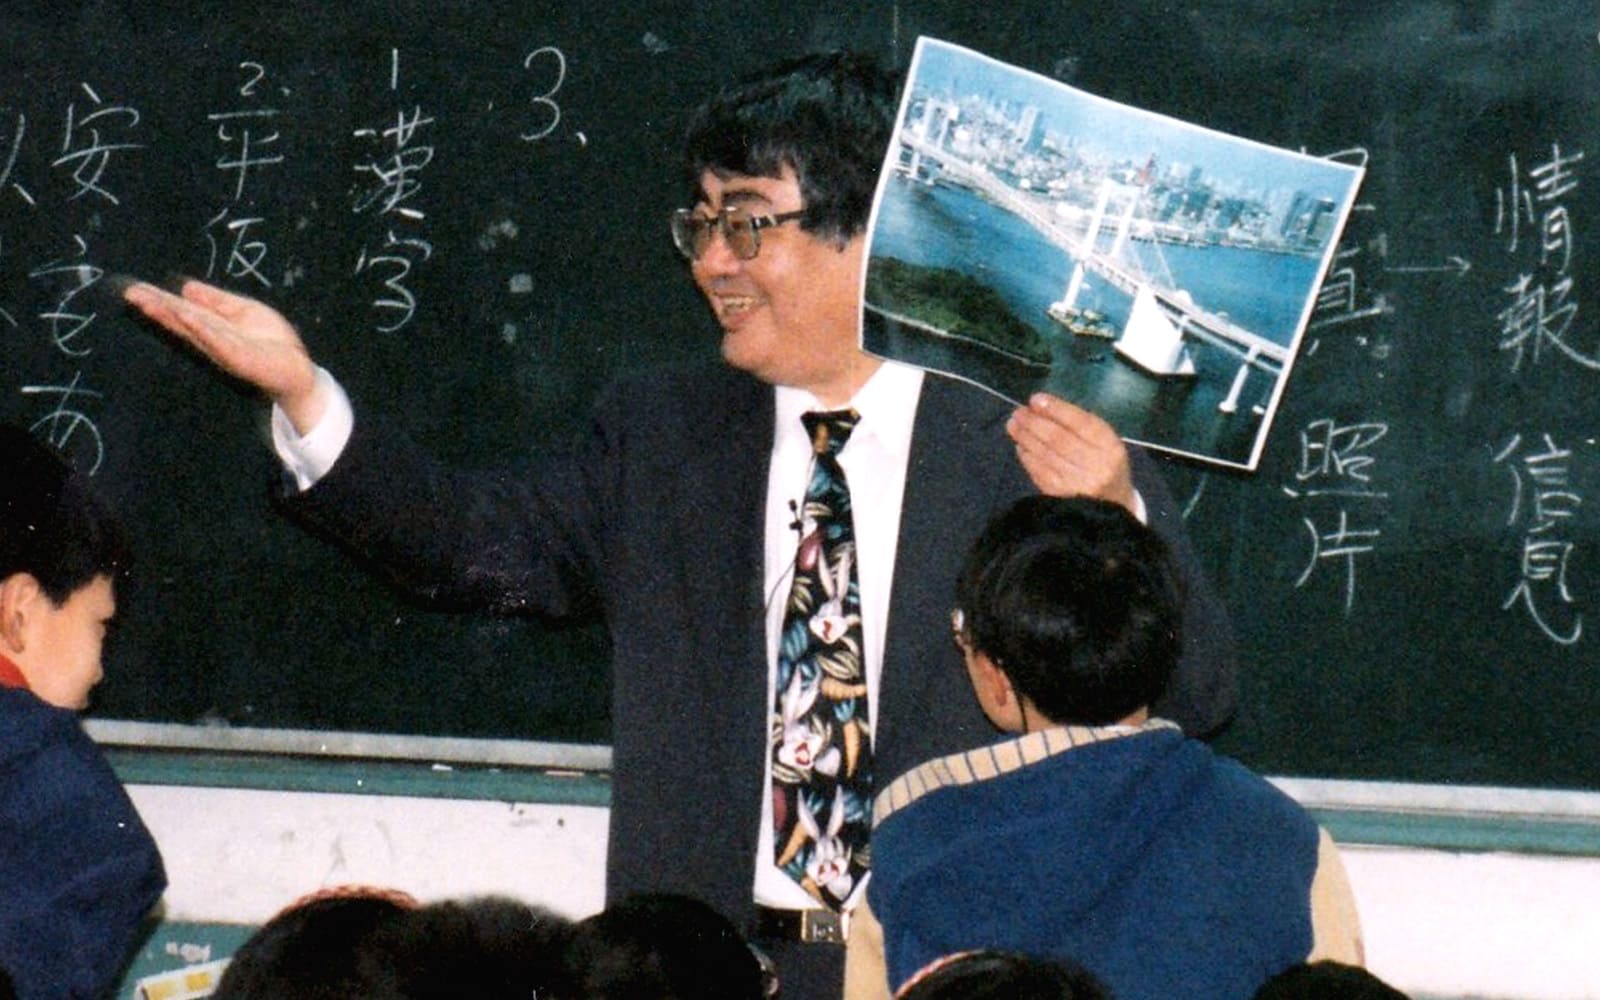 Mr. Mukoyama carried out educational exchange projects with various countries, starting with the United States and China.
(Mr. Mukoyama teaching children in Shanghai 1995)